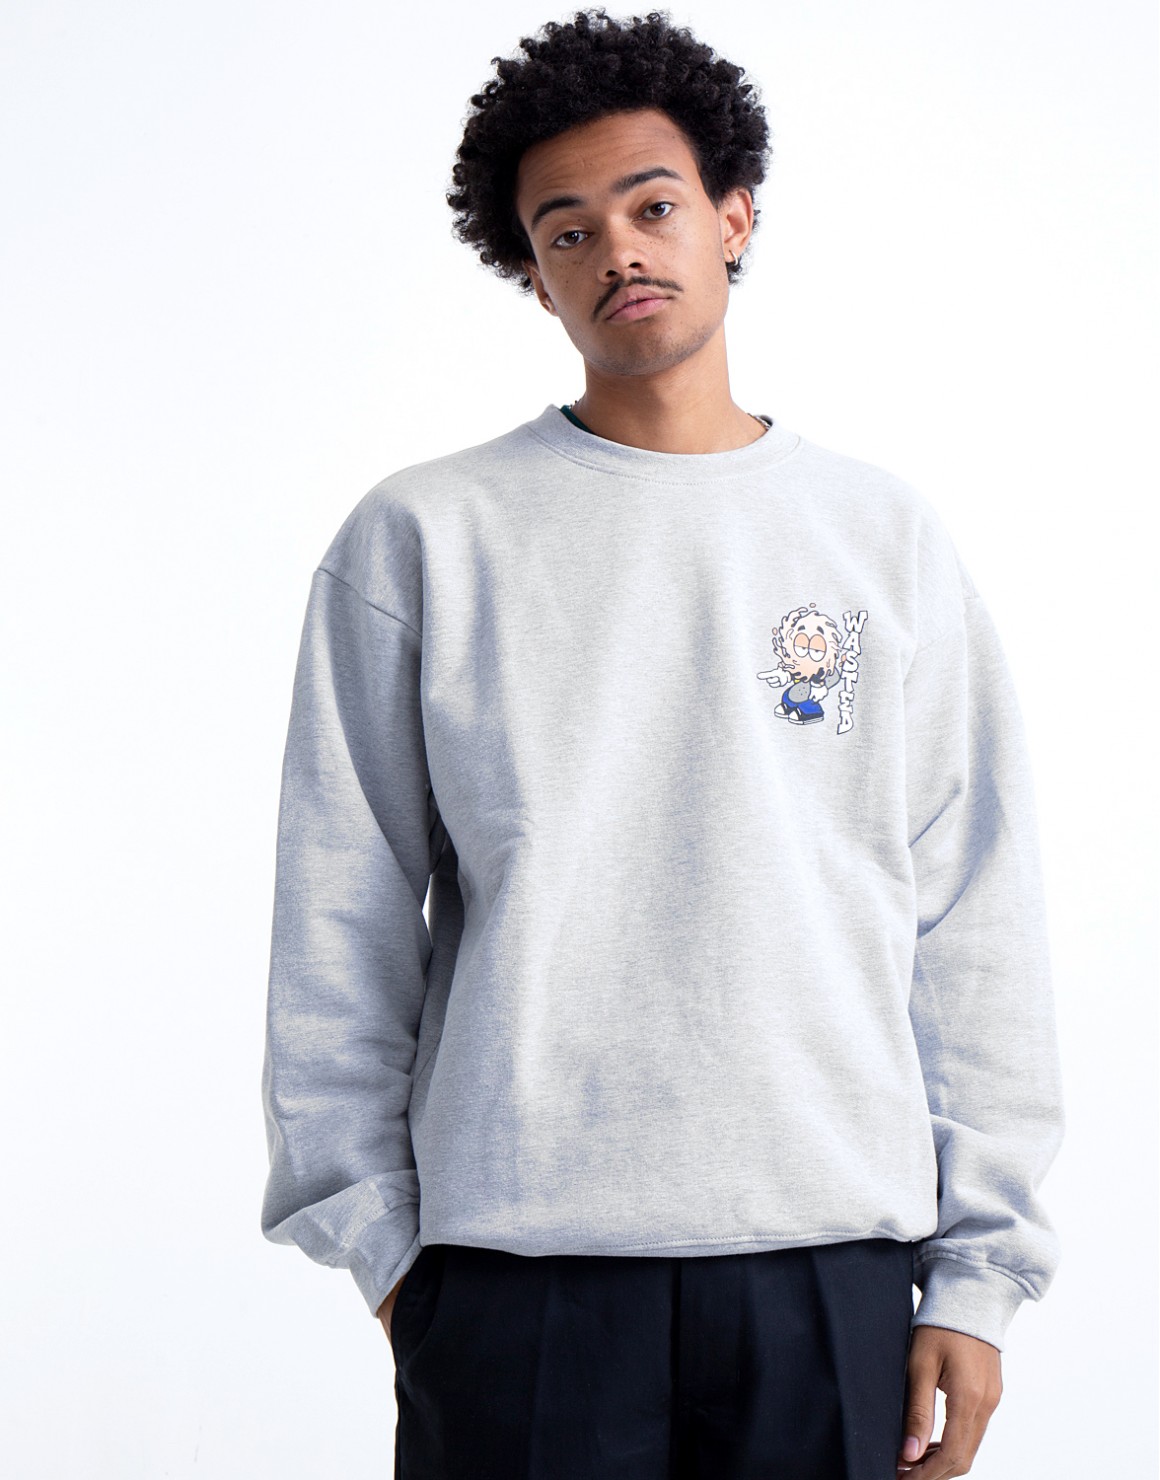 Wasted Paris Vincent Milou Rookie X Wasted Crewneck